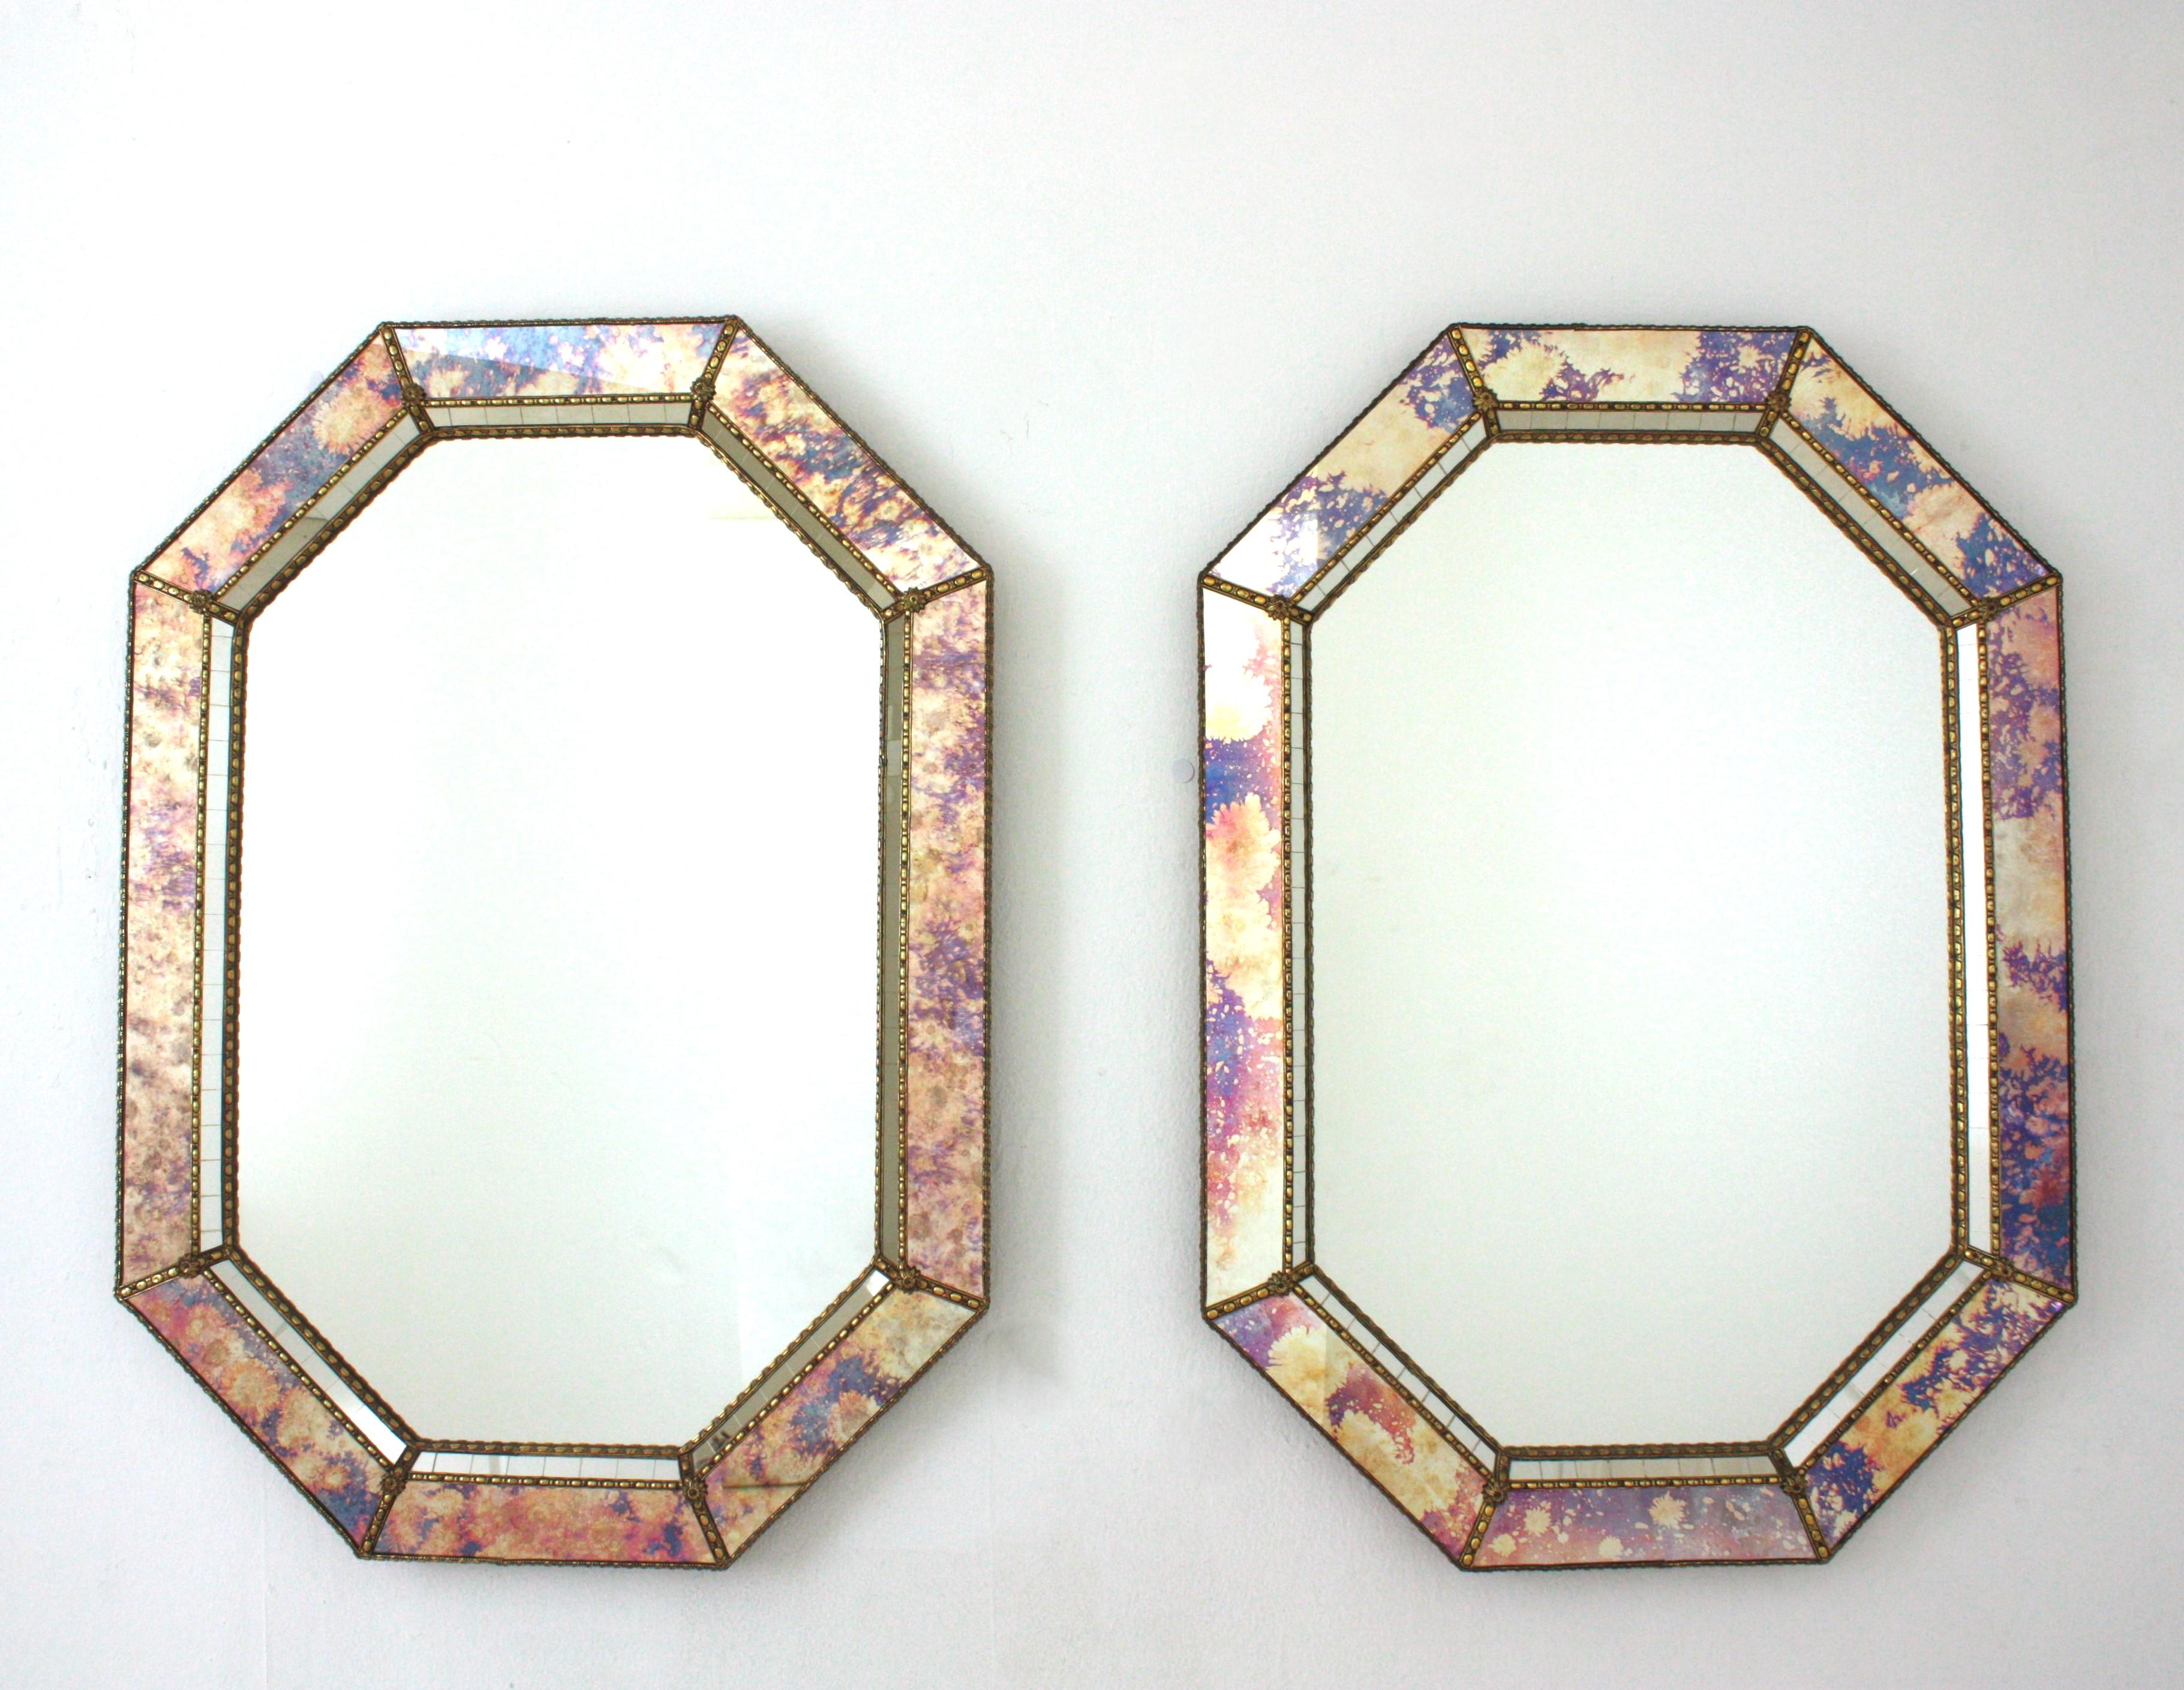 Octagonal Venetian Style Mirrors with Pink Purple Glass & Brass Details, Pair For Sale 2